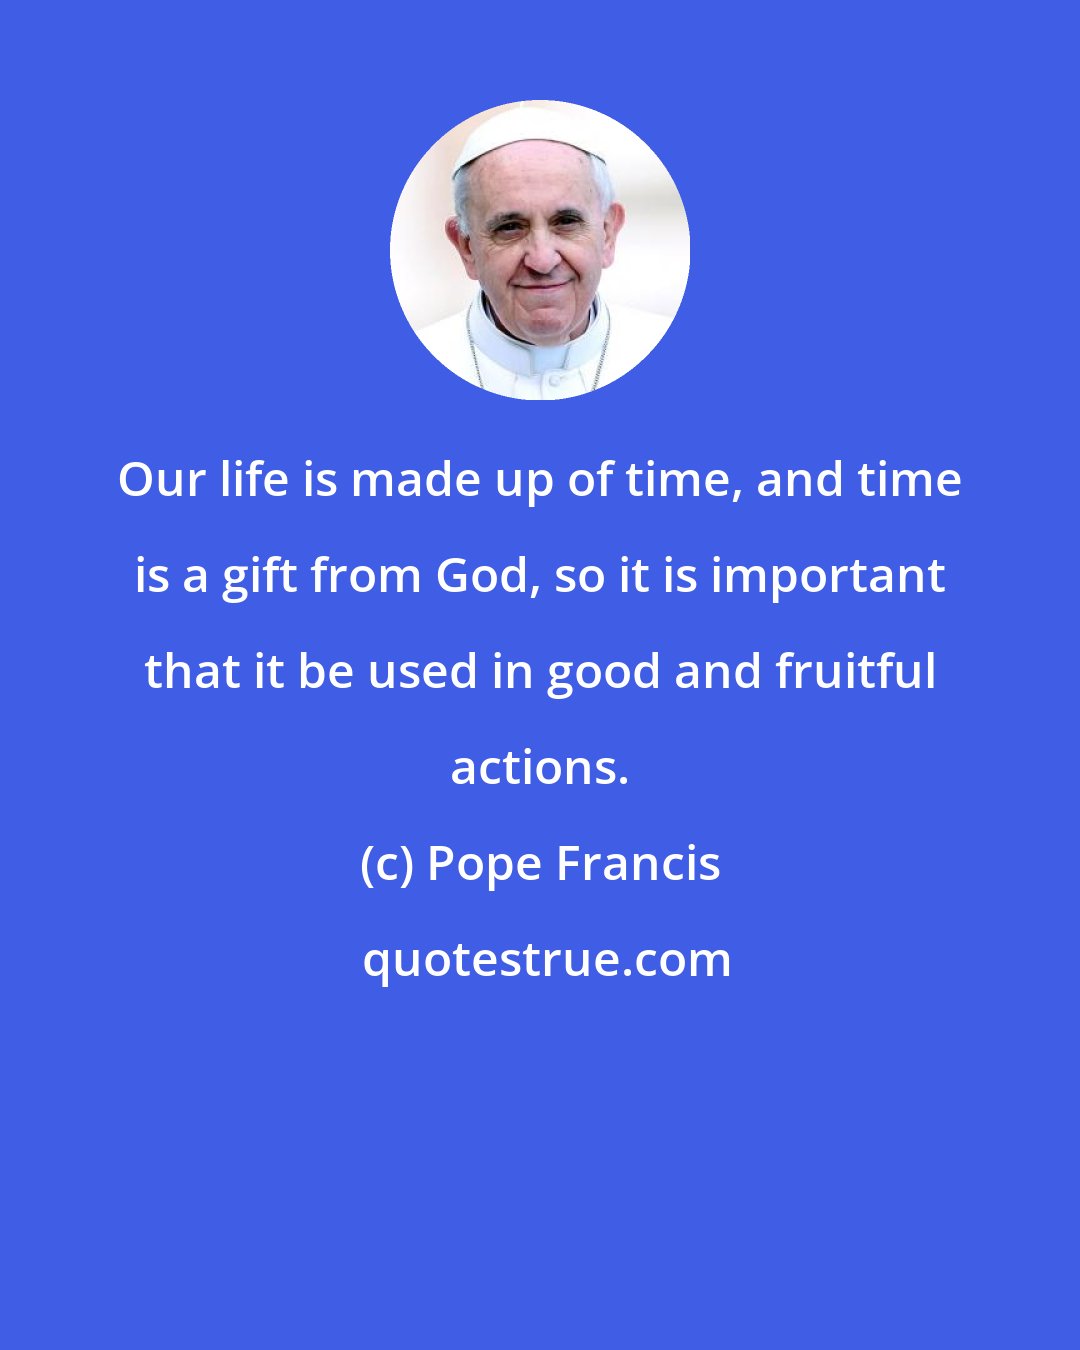 Pope Francis: Our life is made up of time, and time is a gift from God, so it is important that it be used in good and fruitful actions.